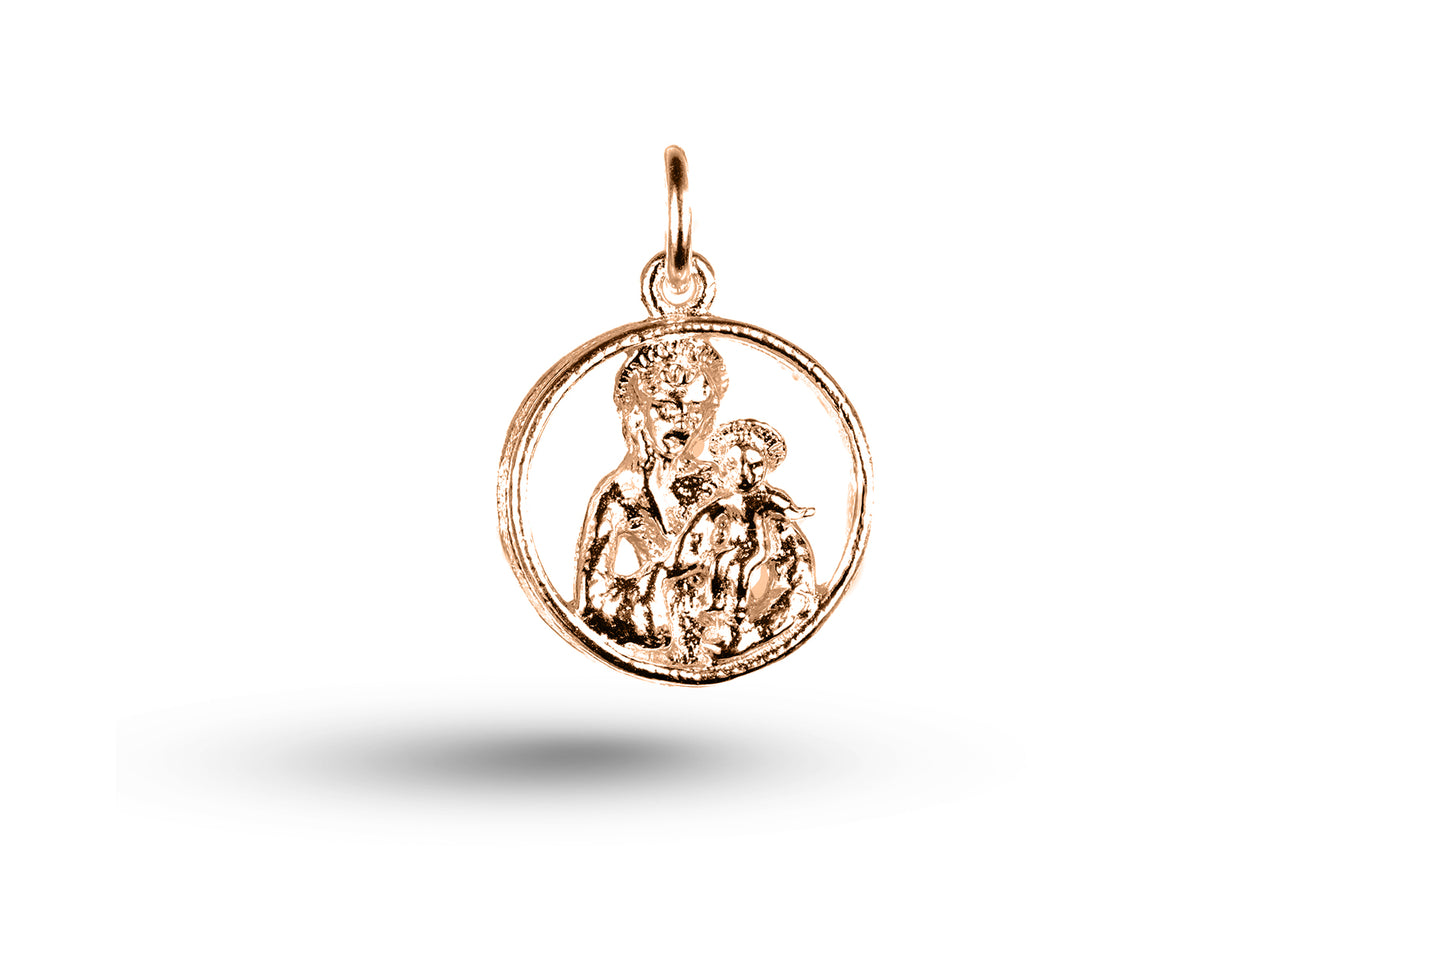 Rose gold Madonna and Child in Surround charm.